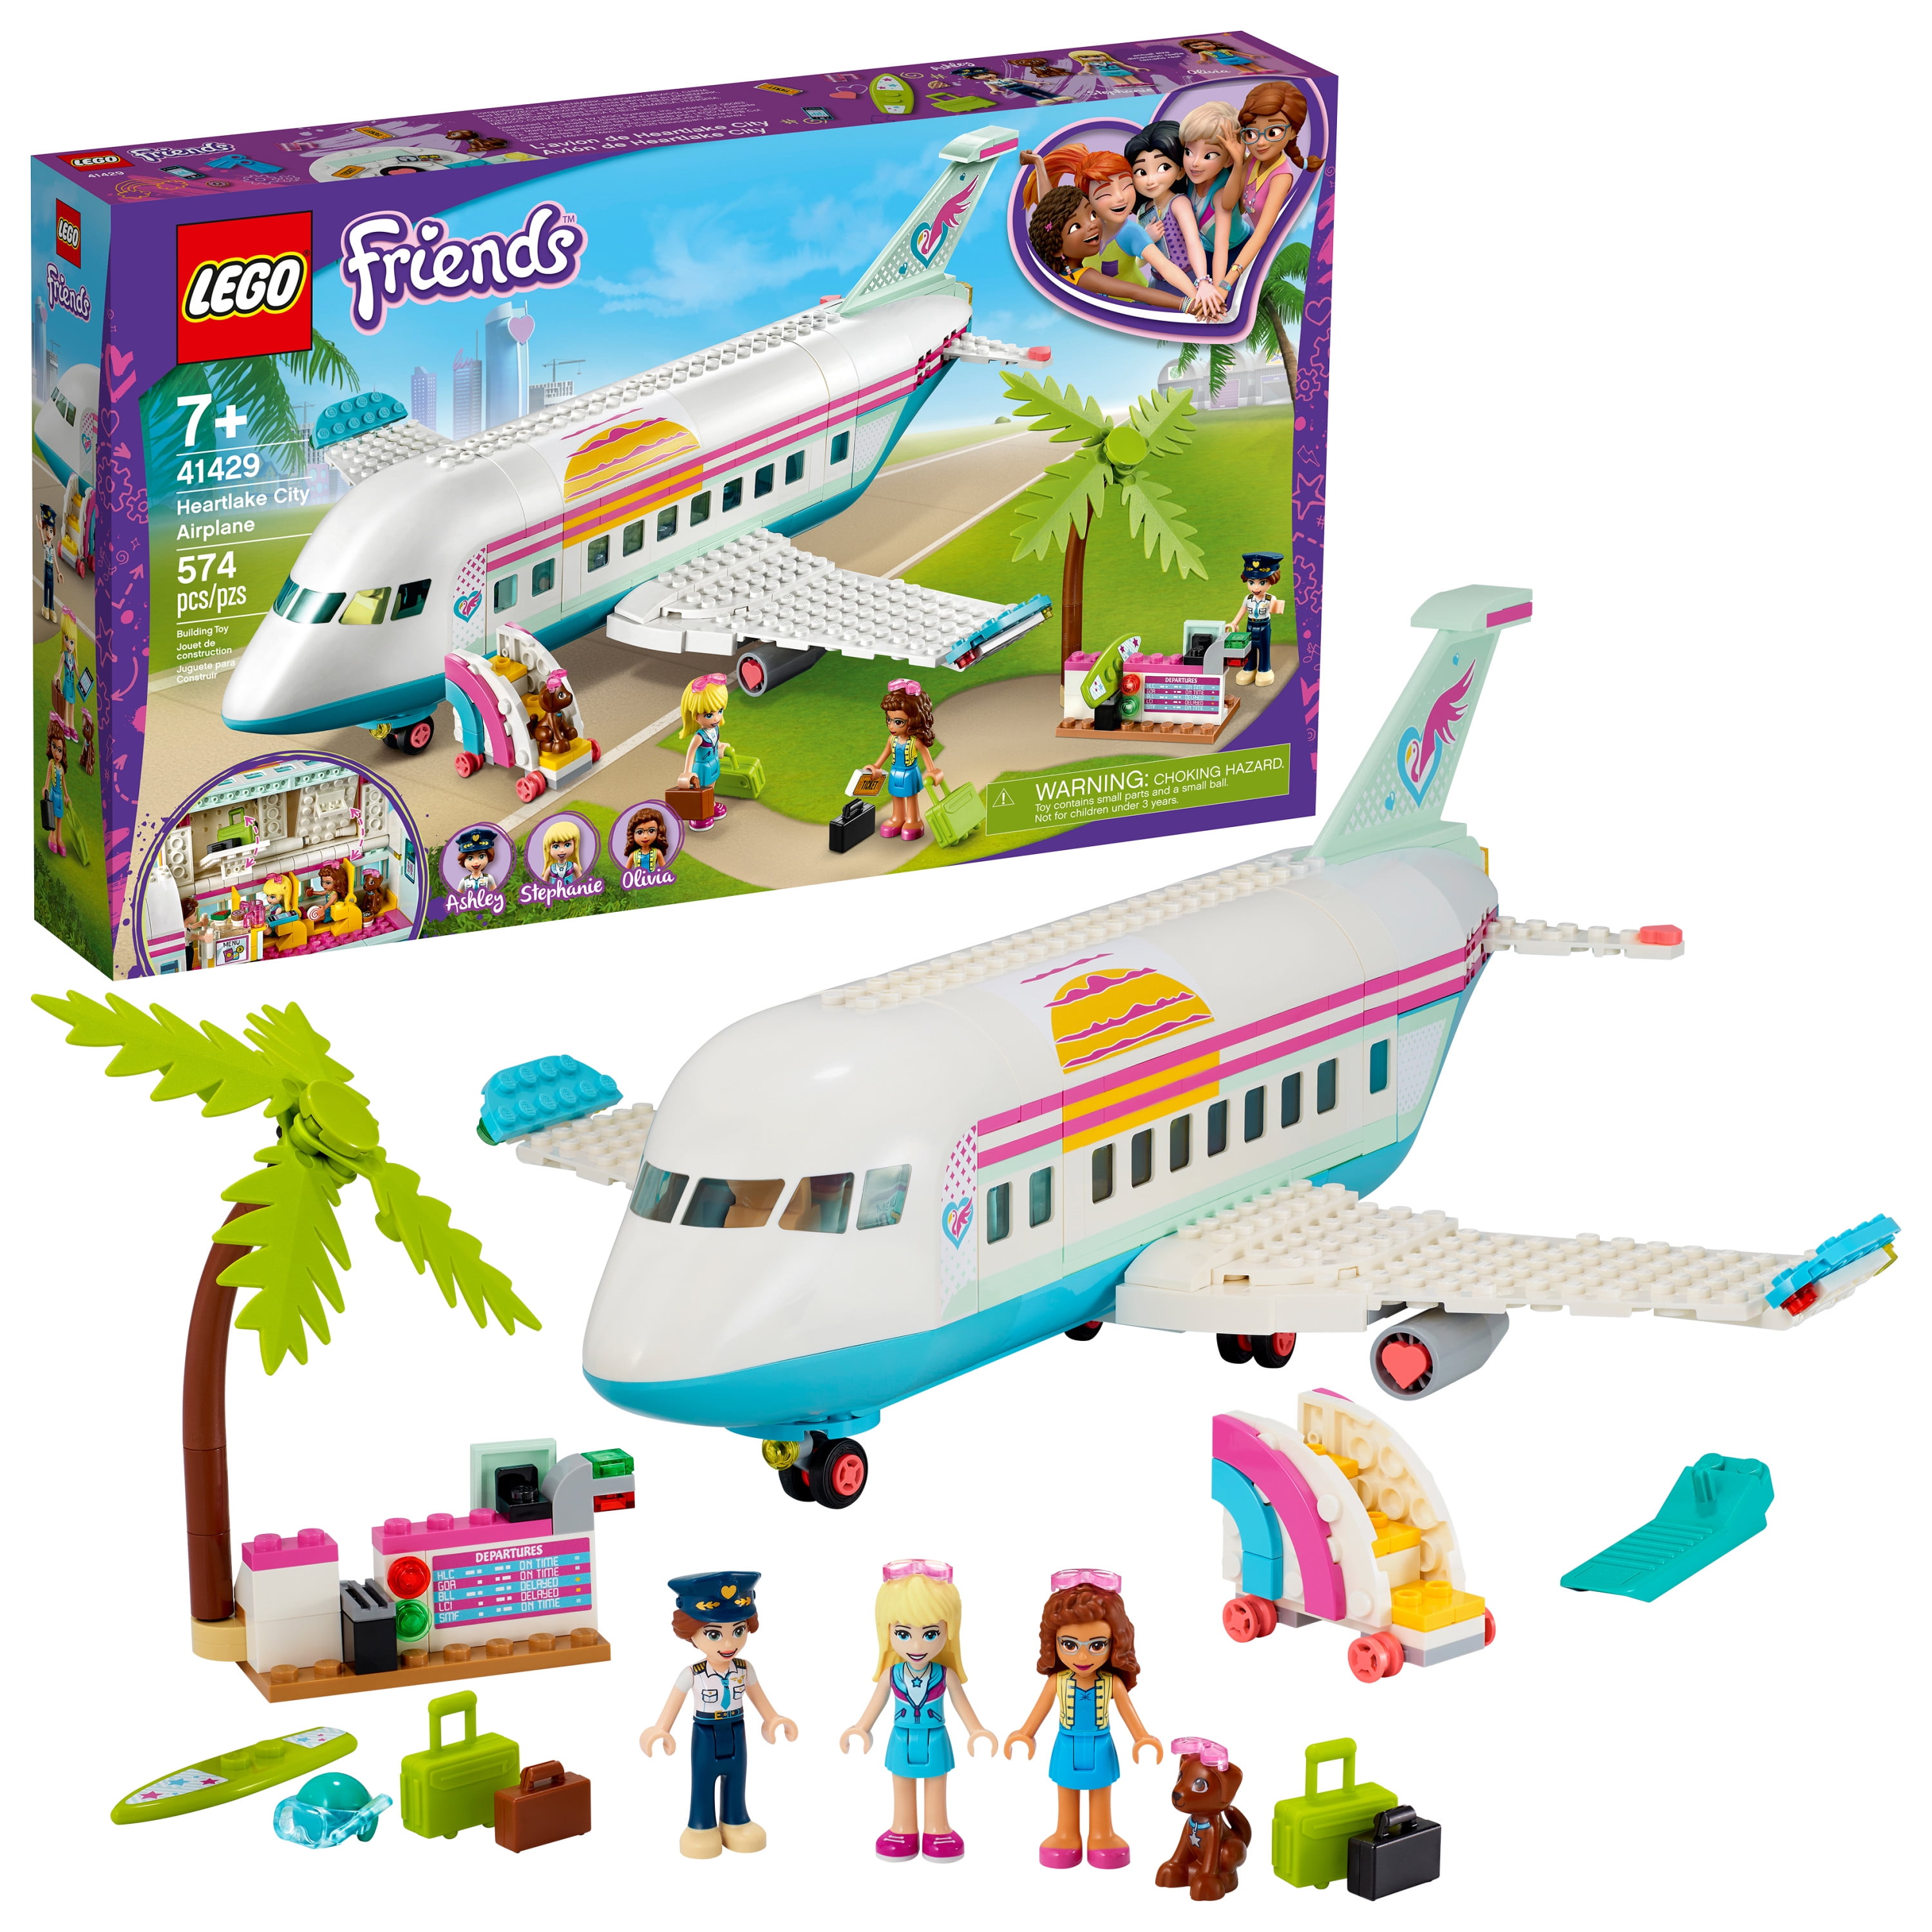 LEGO Friends Heartlake City Airplane Building Toy Inspires Travel Story-Making Play Scenarios (574 Pieces) -